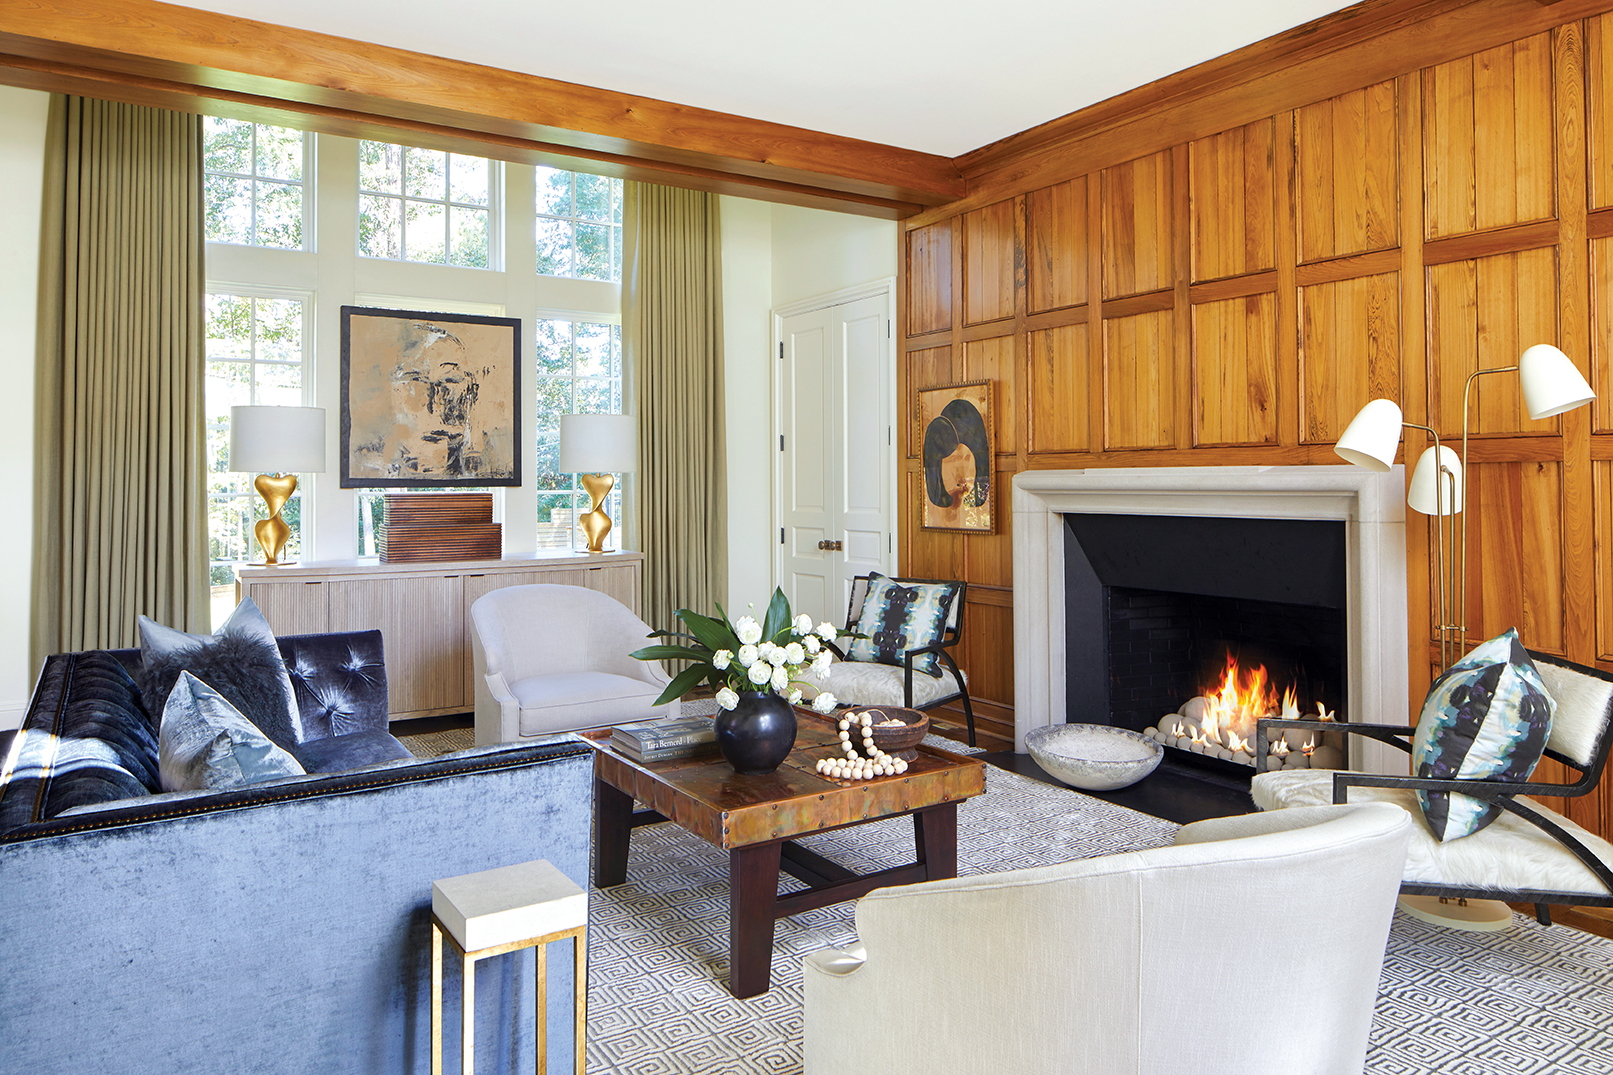 Living room filled with eclectic decor, a wood paneled feature wall and fire place, and blue velvet couch.